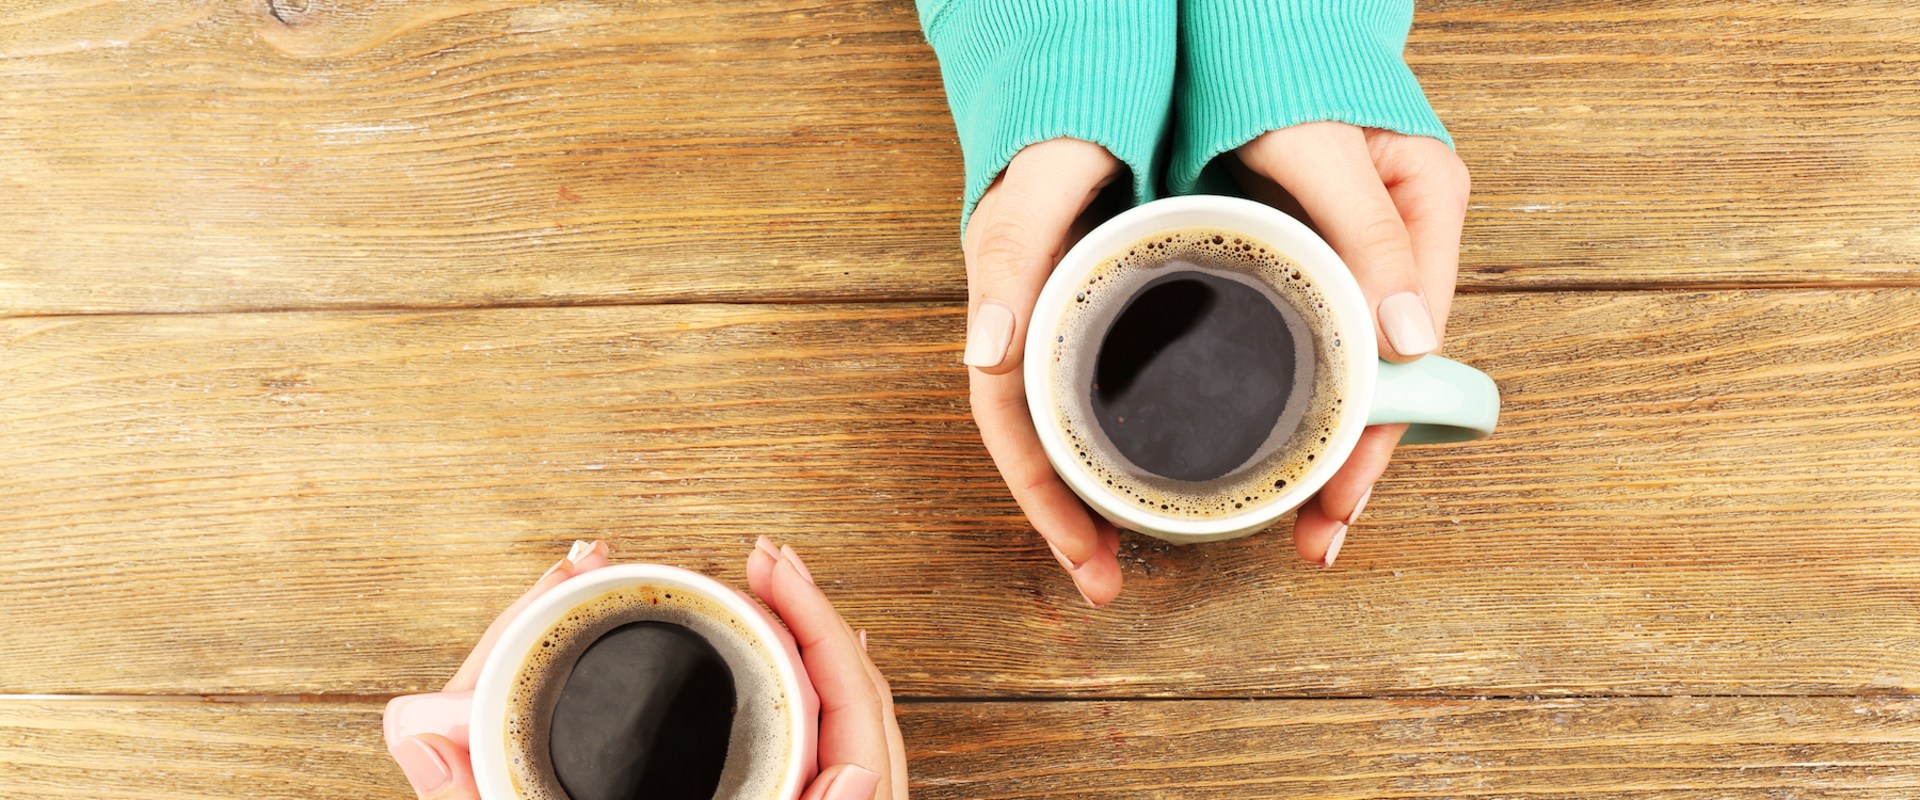 Does Coffee Affect Blood Sugar Levels in People with Diabetes?